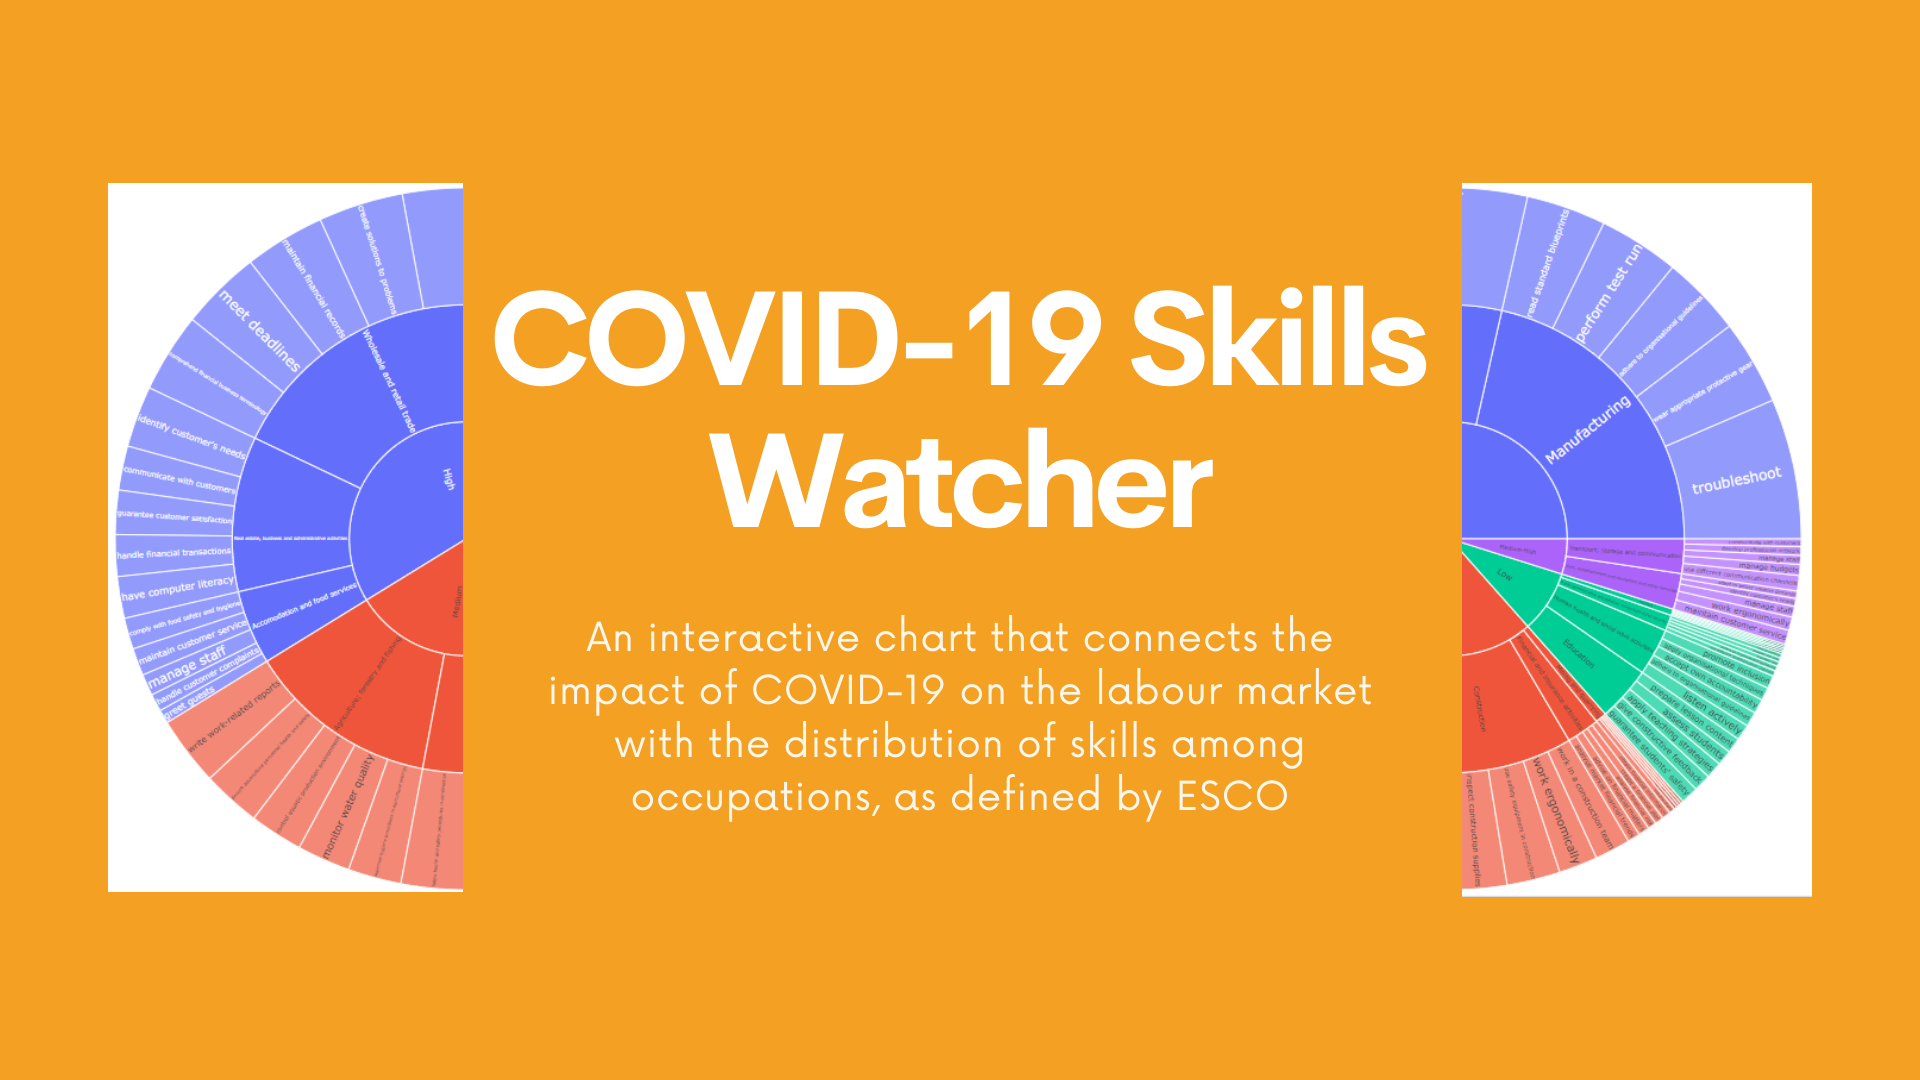 Image repeating the title of the News article in case: Covid-19 Skills Watcher